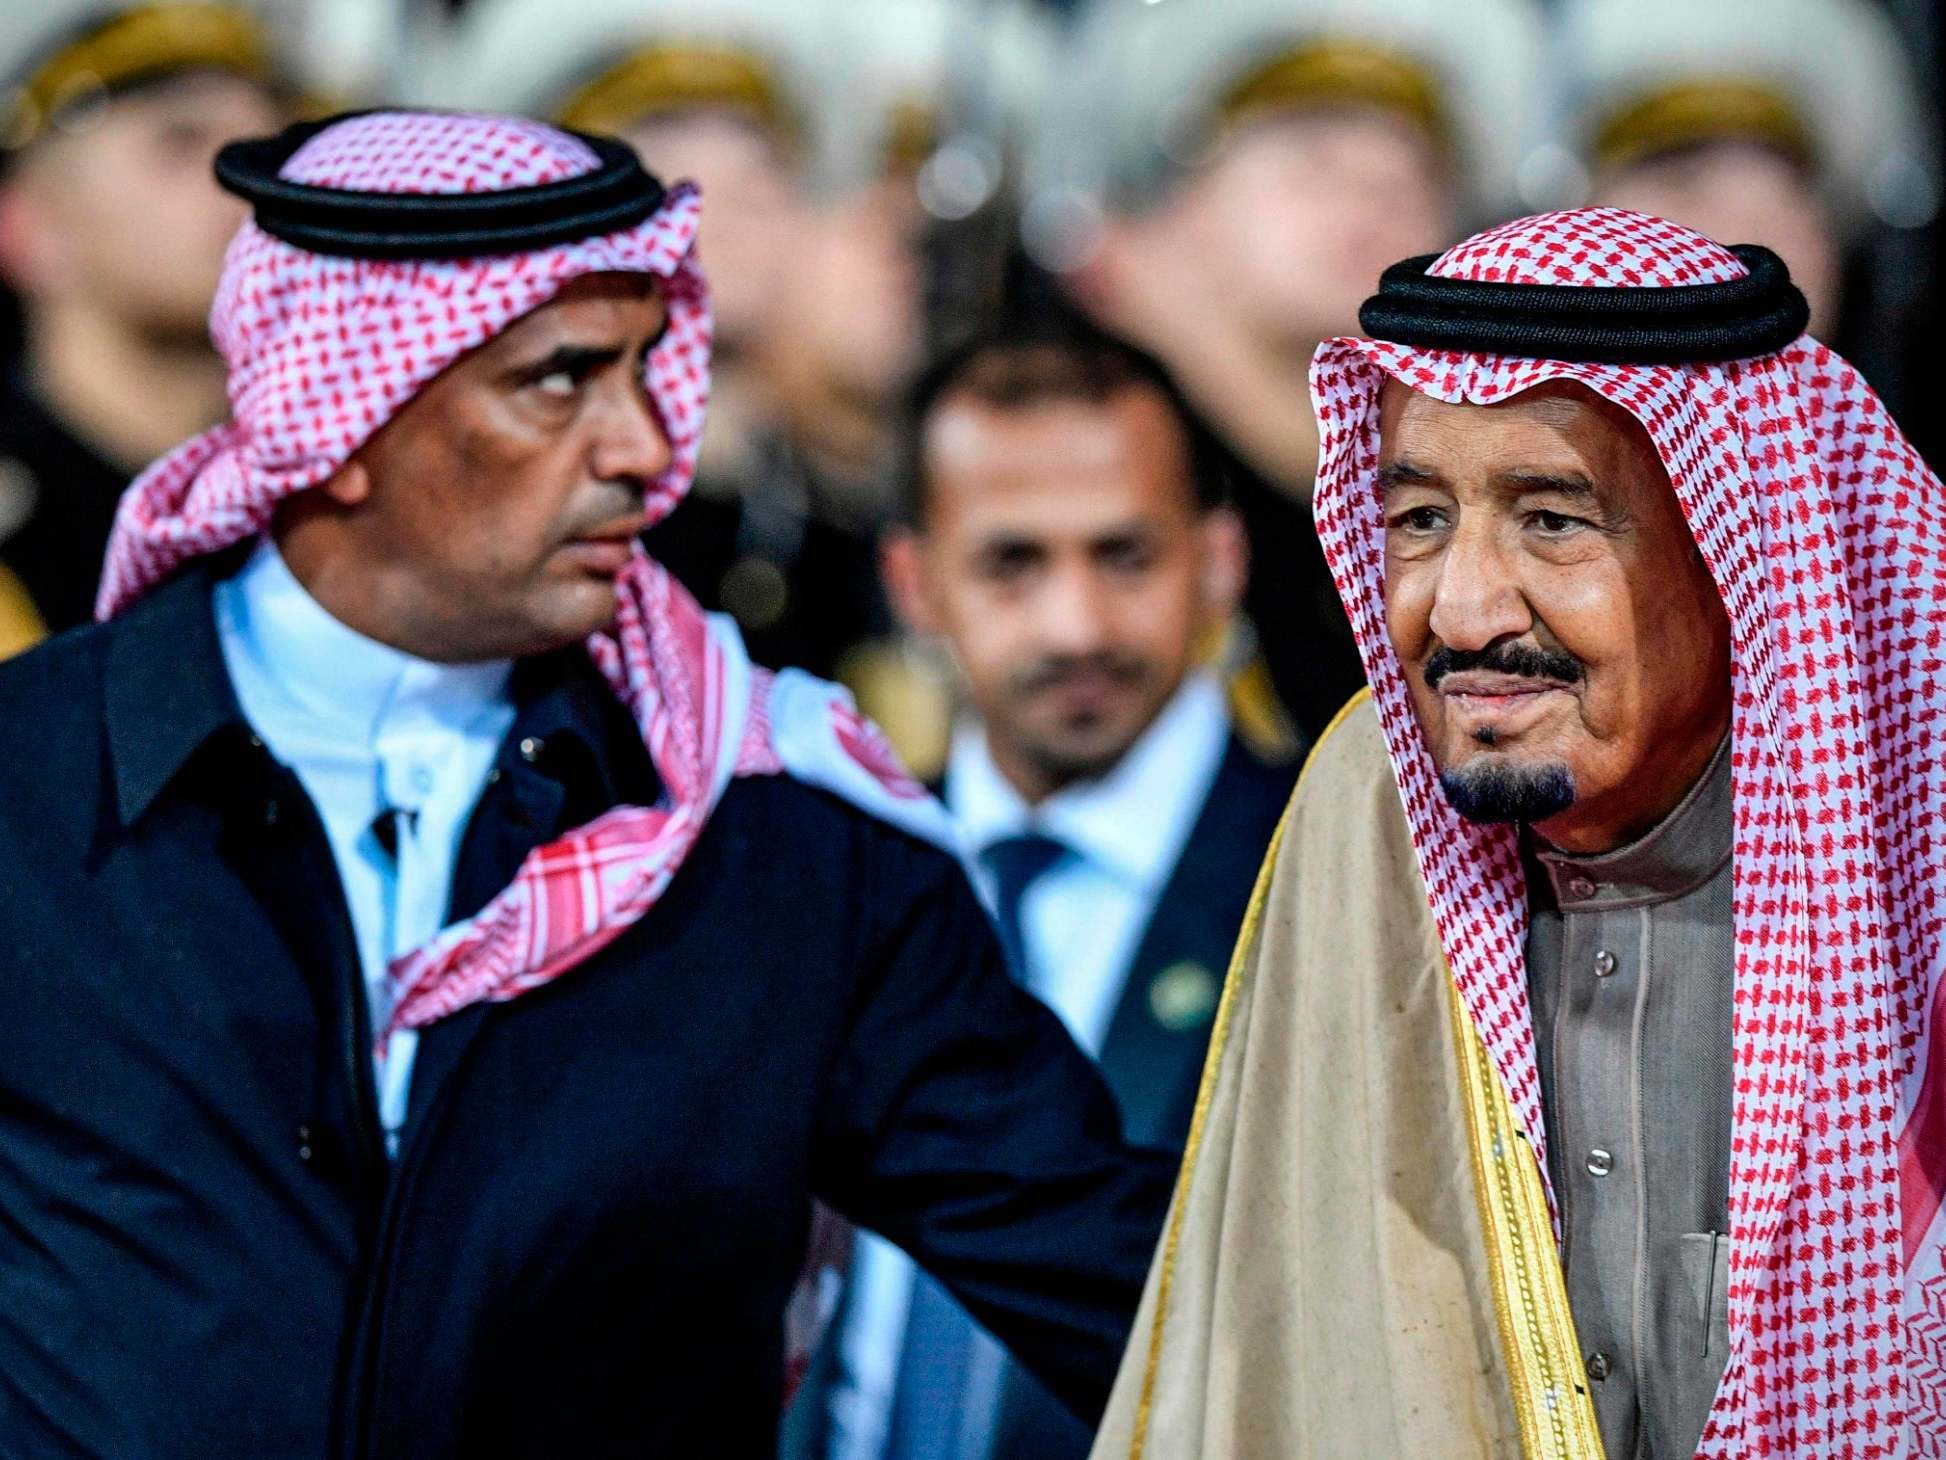 Abdulaziz al-Fagham was known to the public in Saudi Arabia due to his frequent appearances with King Salman